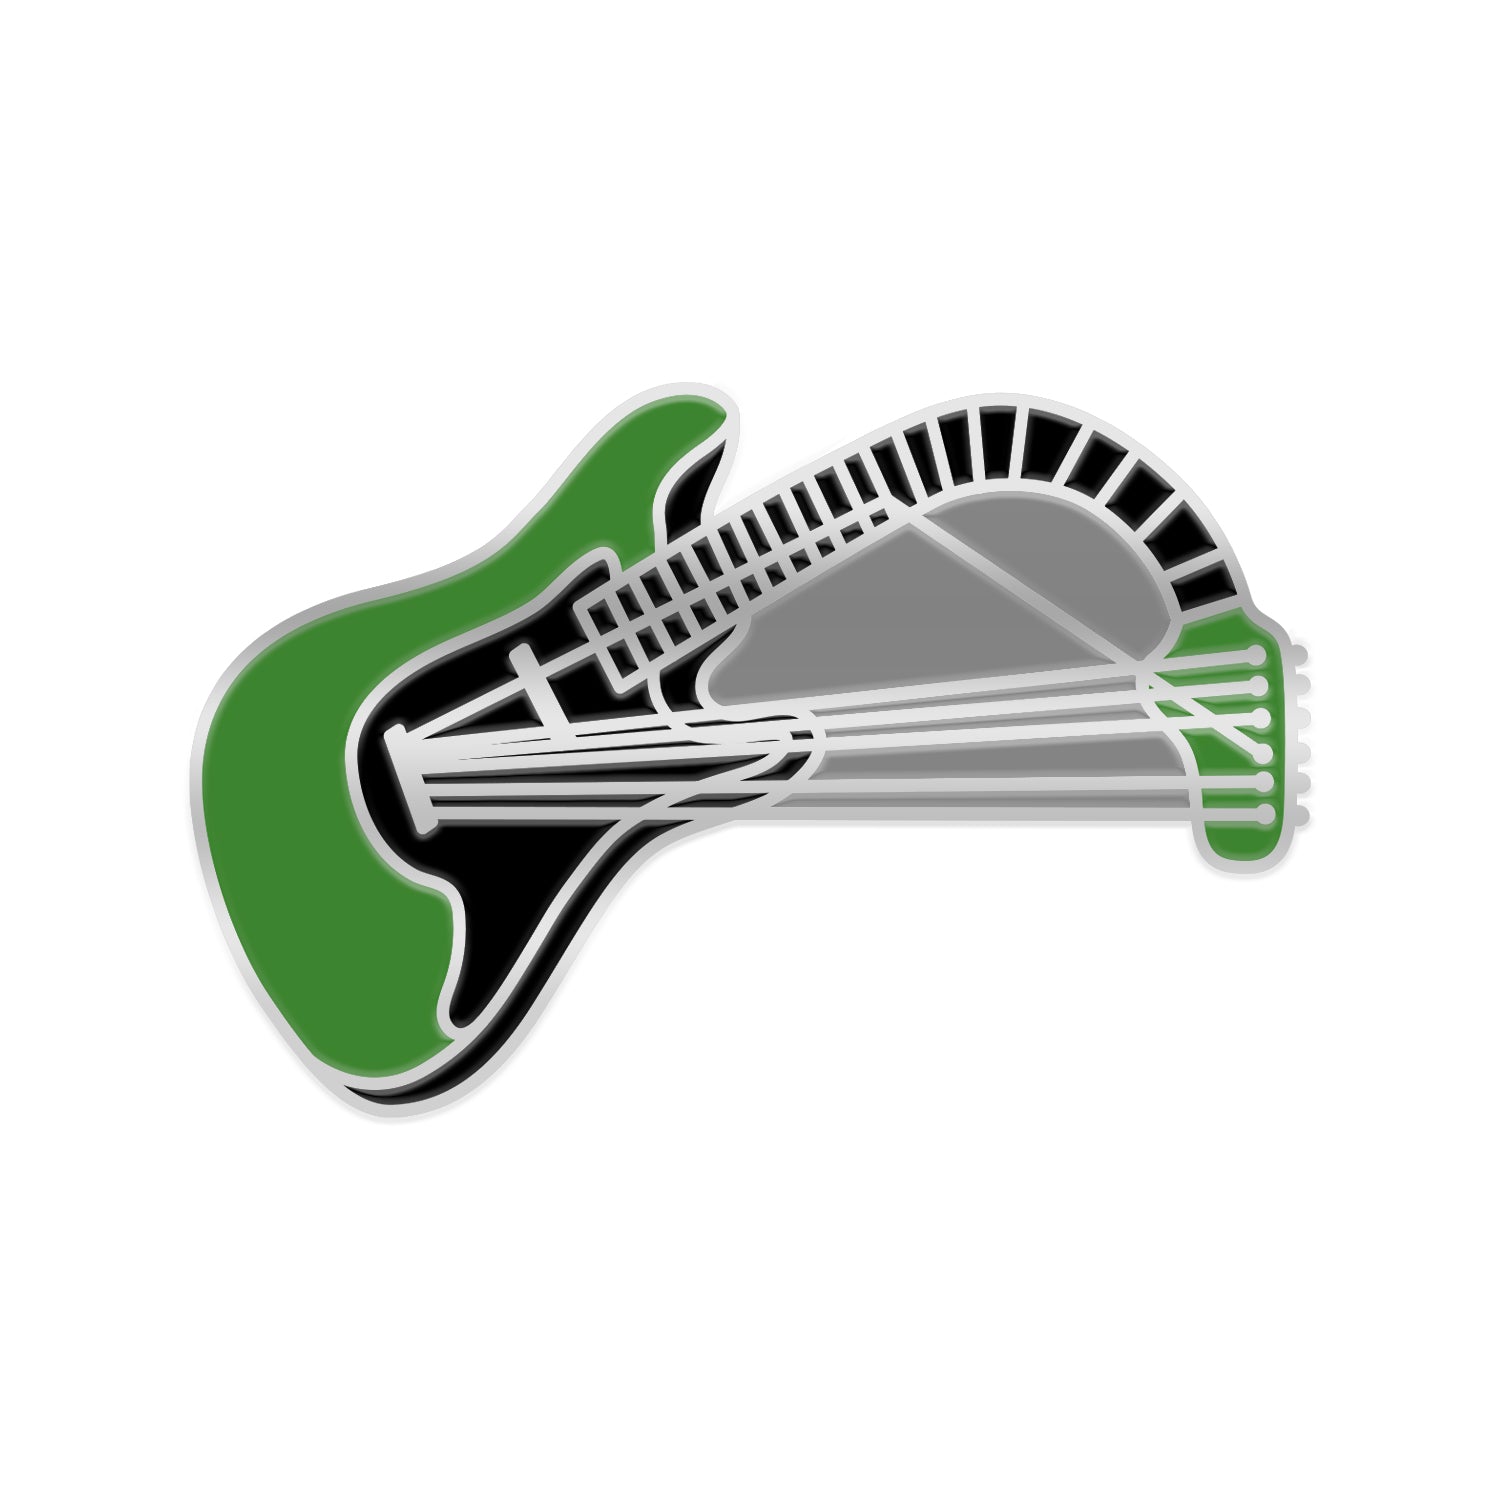 Enamel pin against white background. green electric guitar with a black neck and white strings. The neck of the guitar is bent.